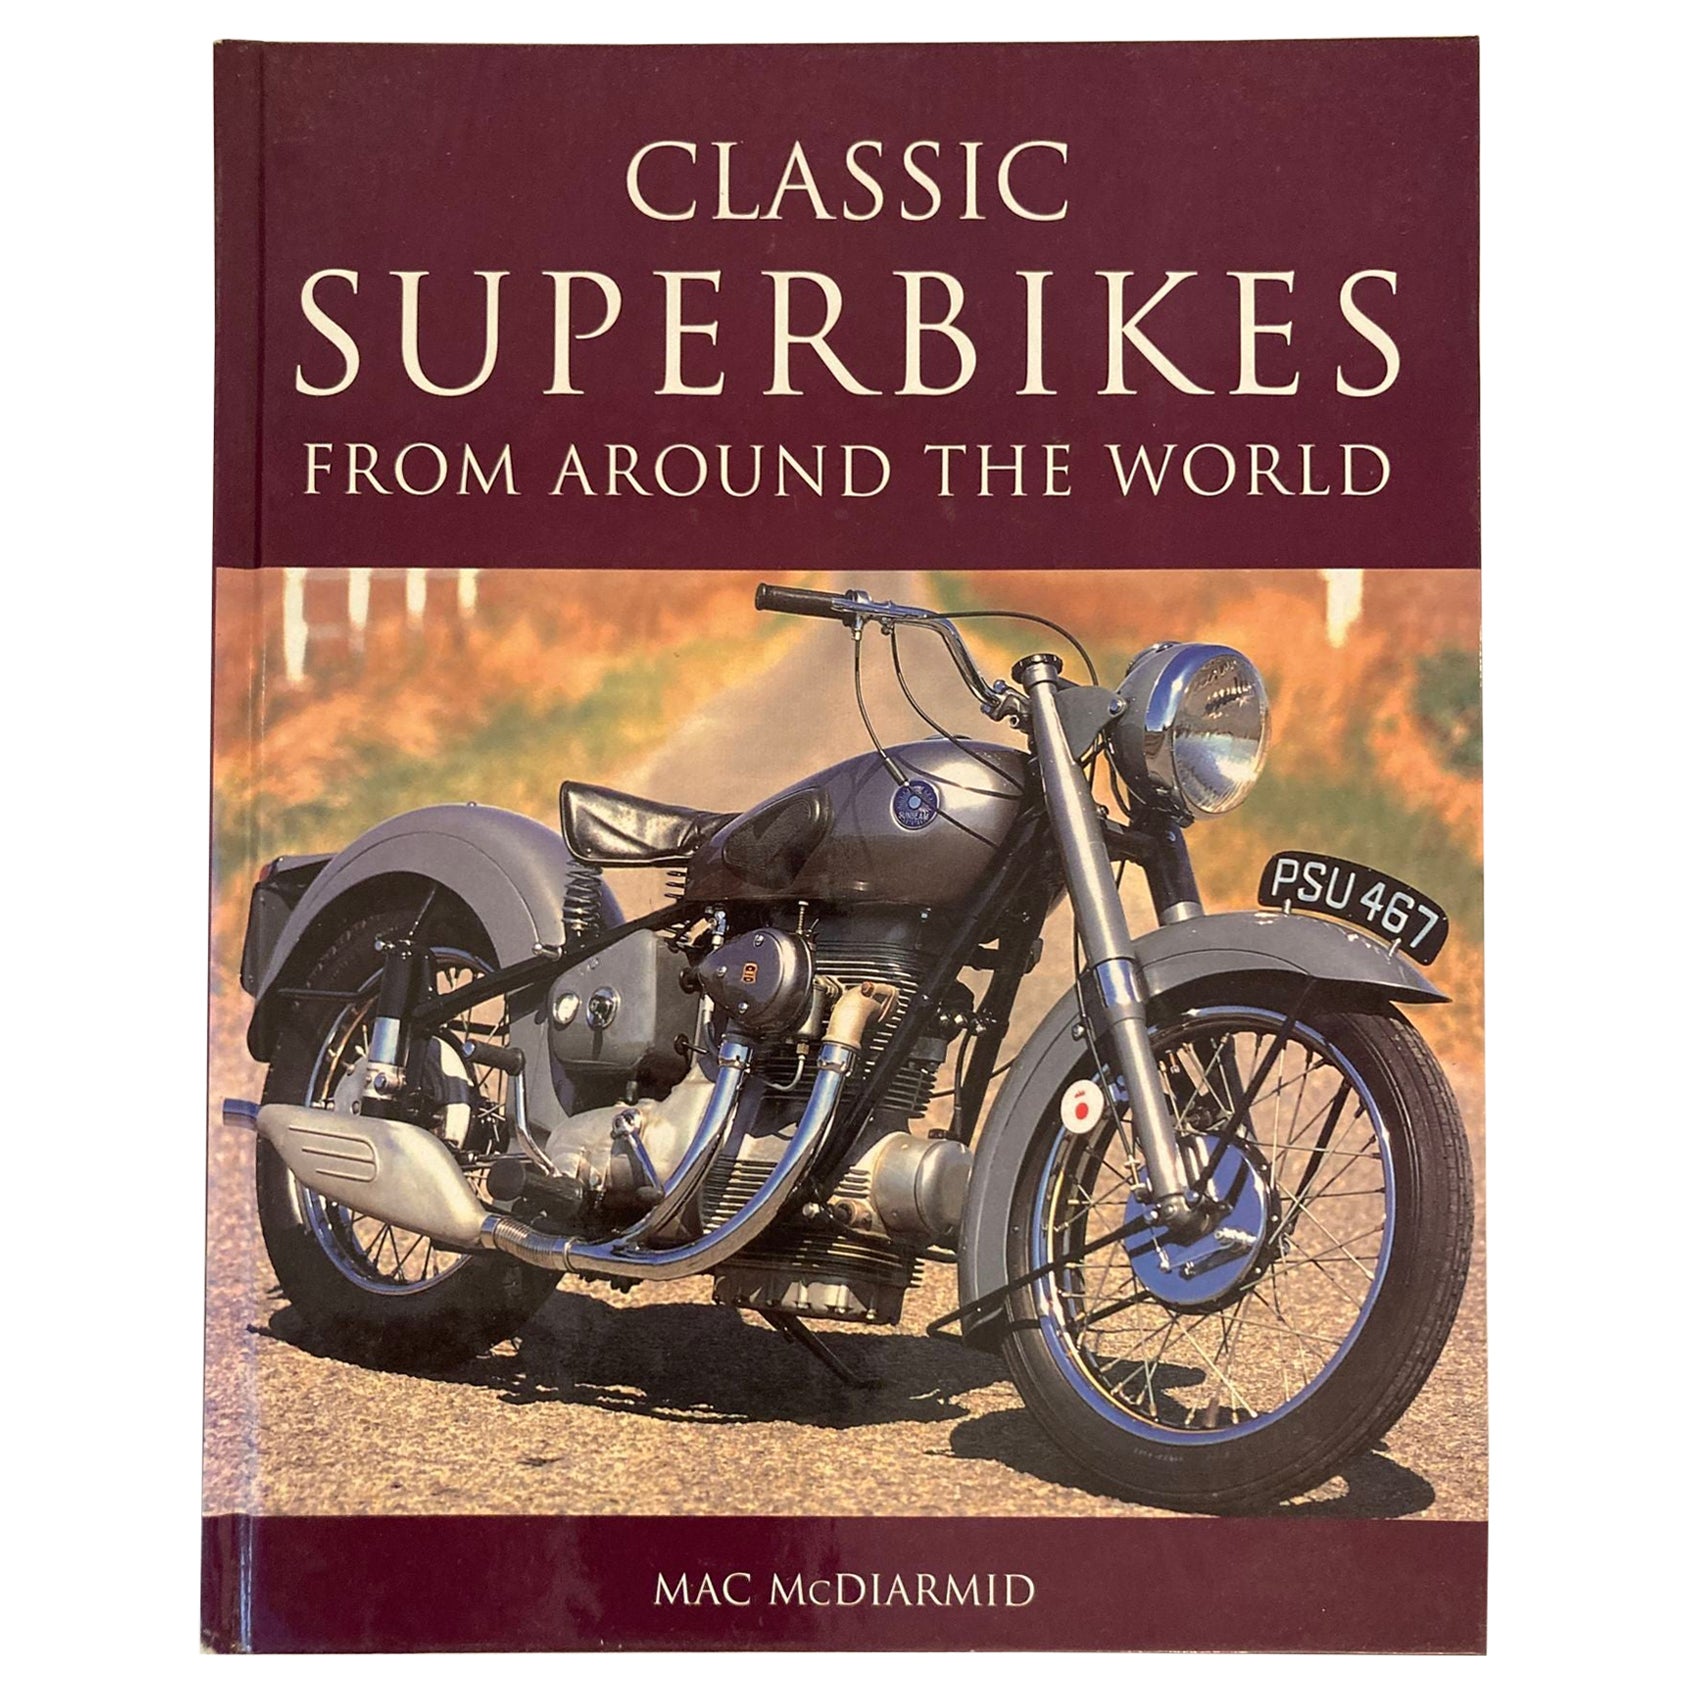 Livre « Classic Superbikes from Around the World », couverture rigide, 2003